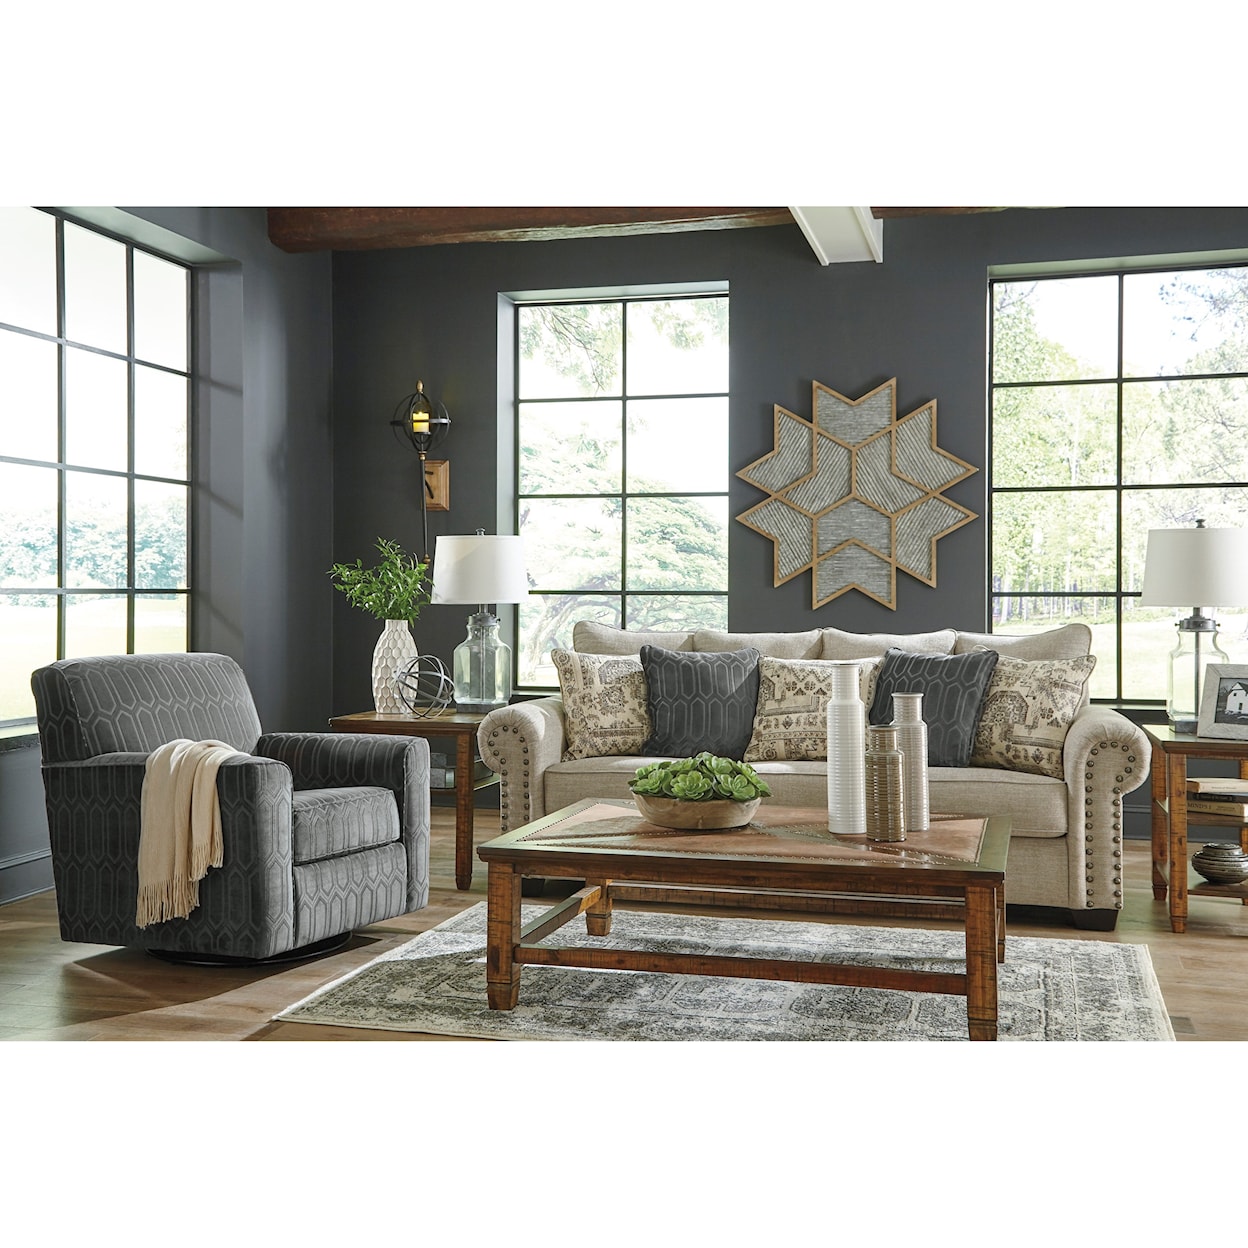 Signature Design by Ashley Zarina Stationary Living Room Group